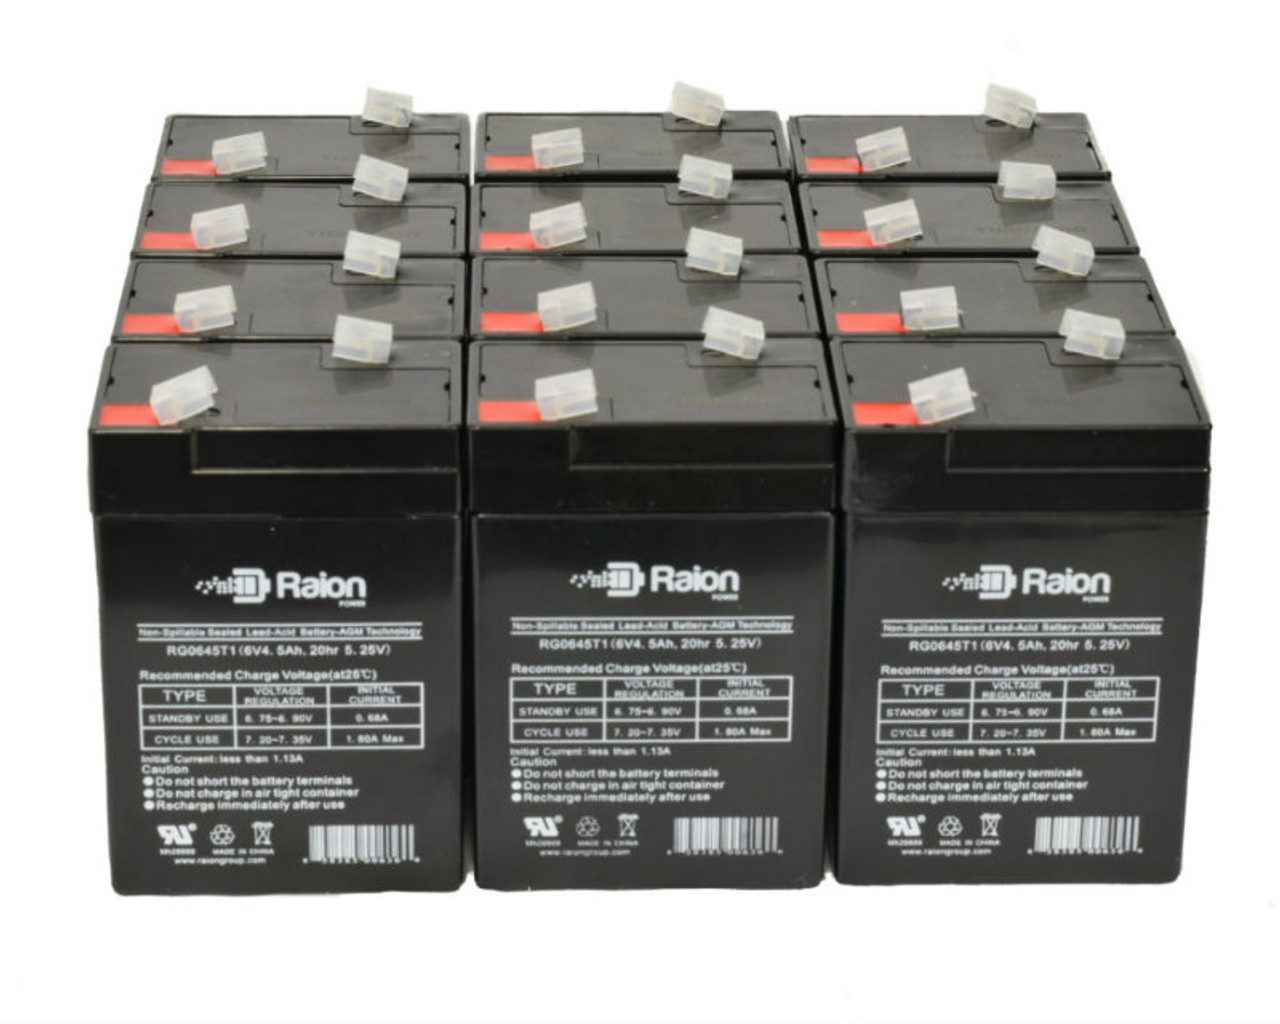 Raion Power 6V 4.5Ah Replacement Emergency Light Battery for Lithonia H2M - 12 Pack